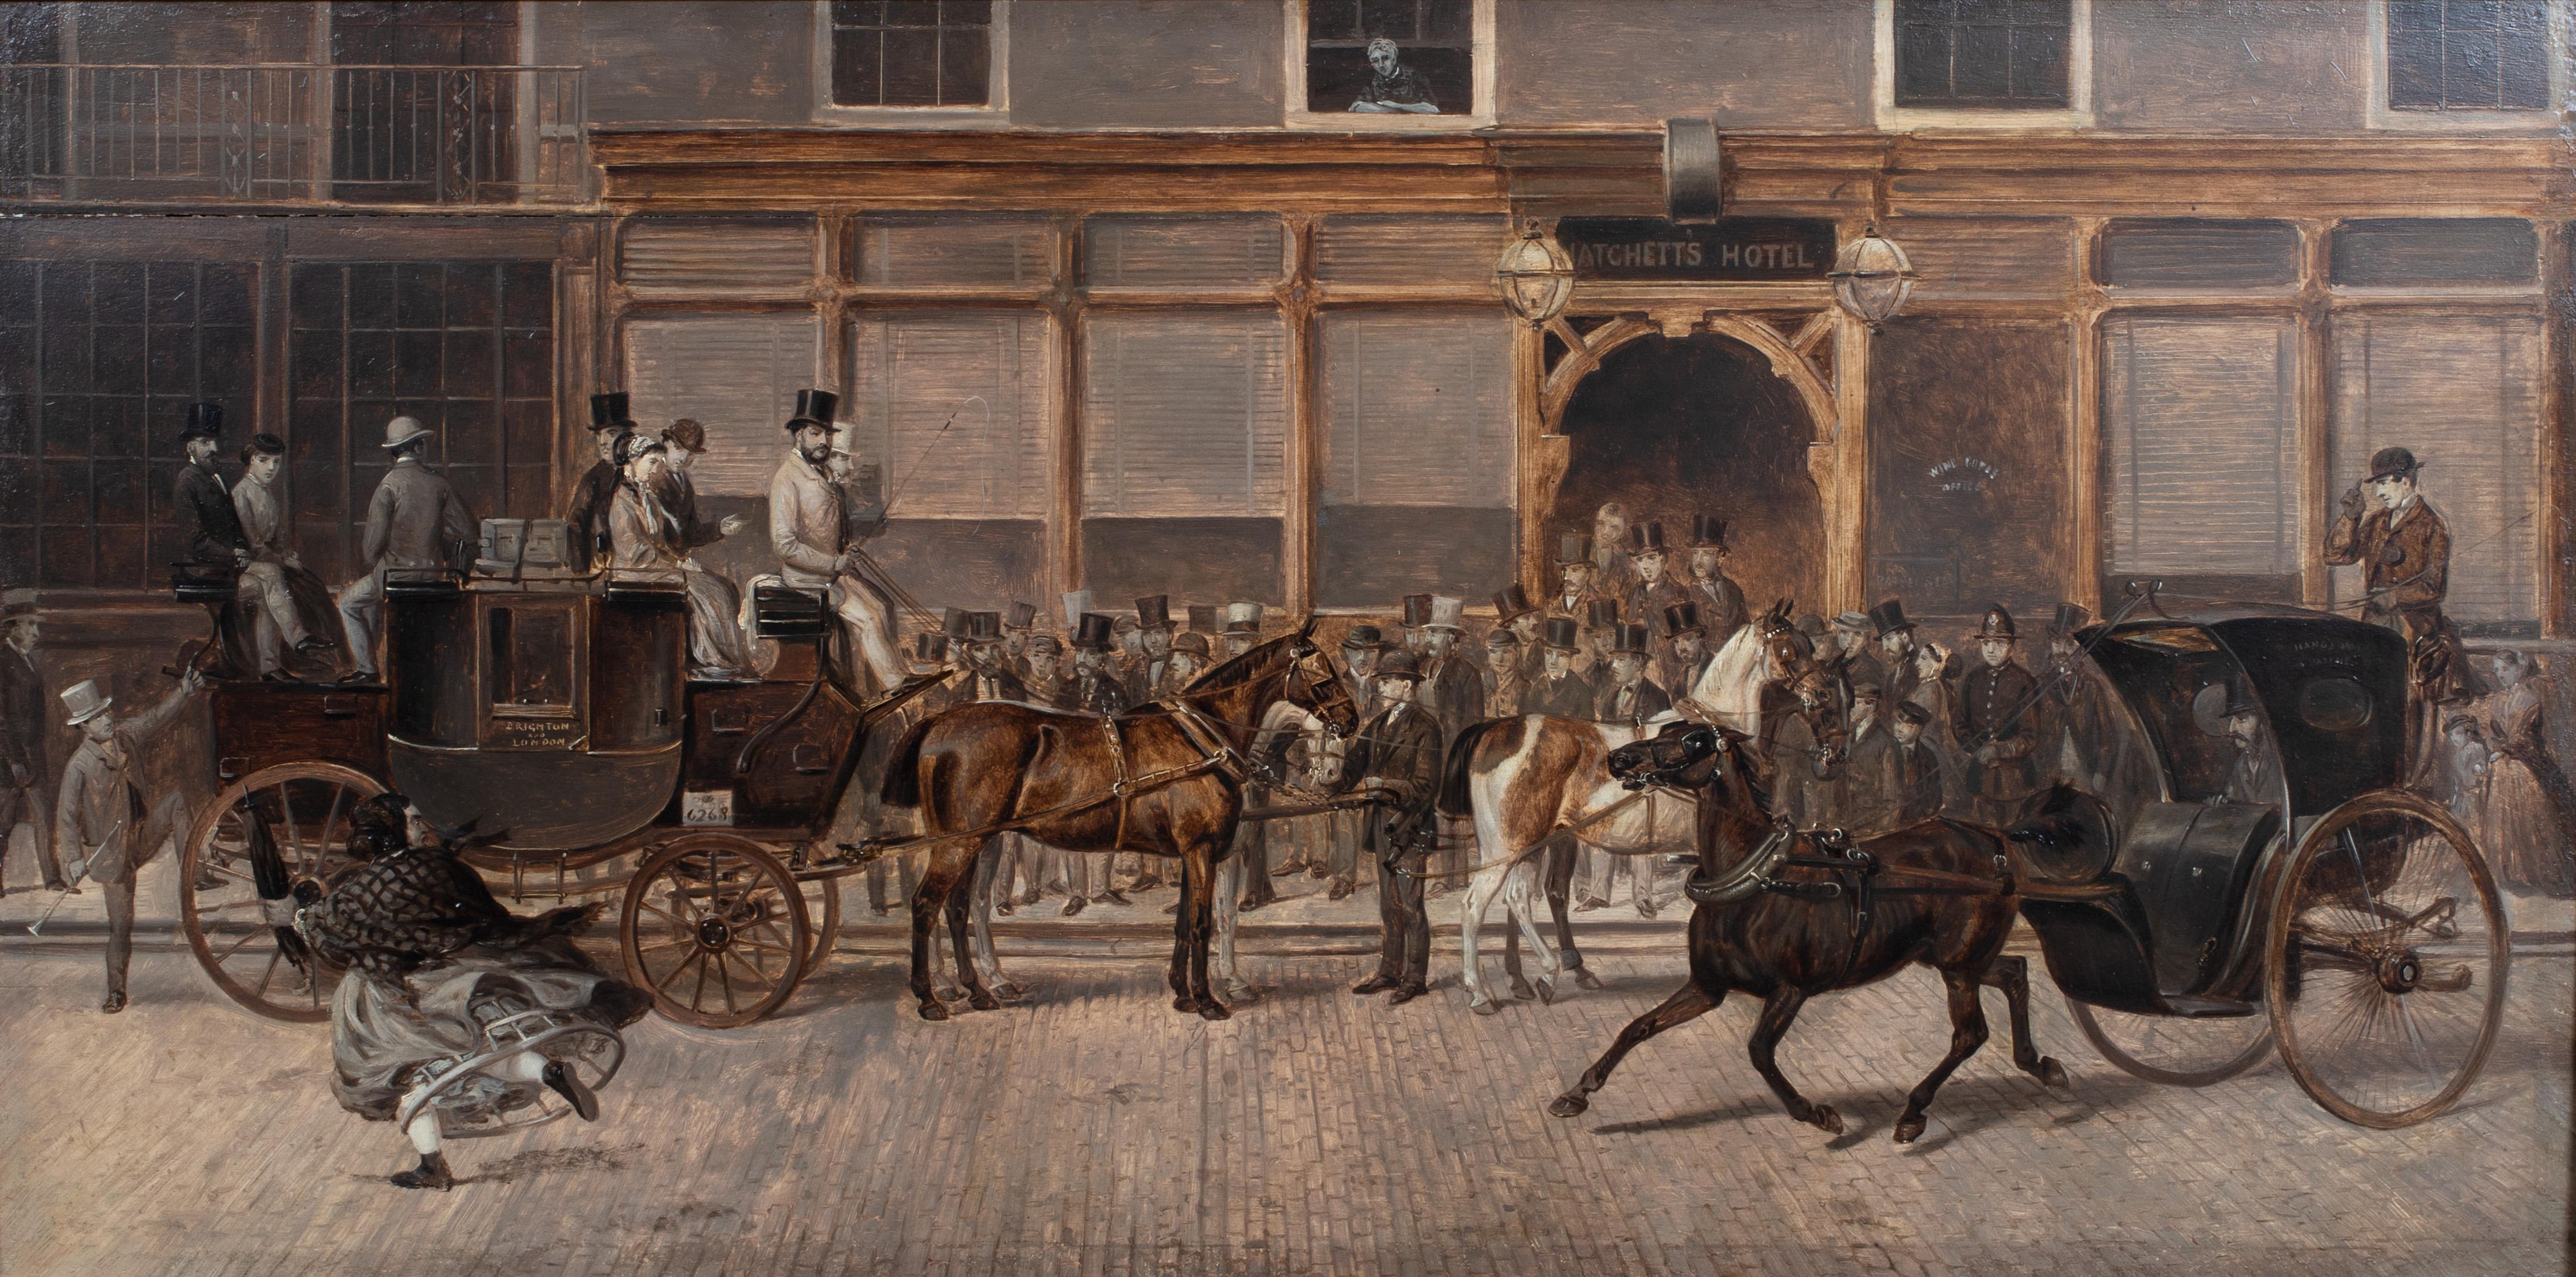 Unknown Portrait Painting - Street Scene at Old White Horse Cellar "Hatchett's Hotel" (The Ritz), Piccadilly